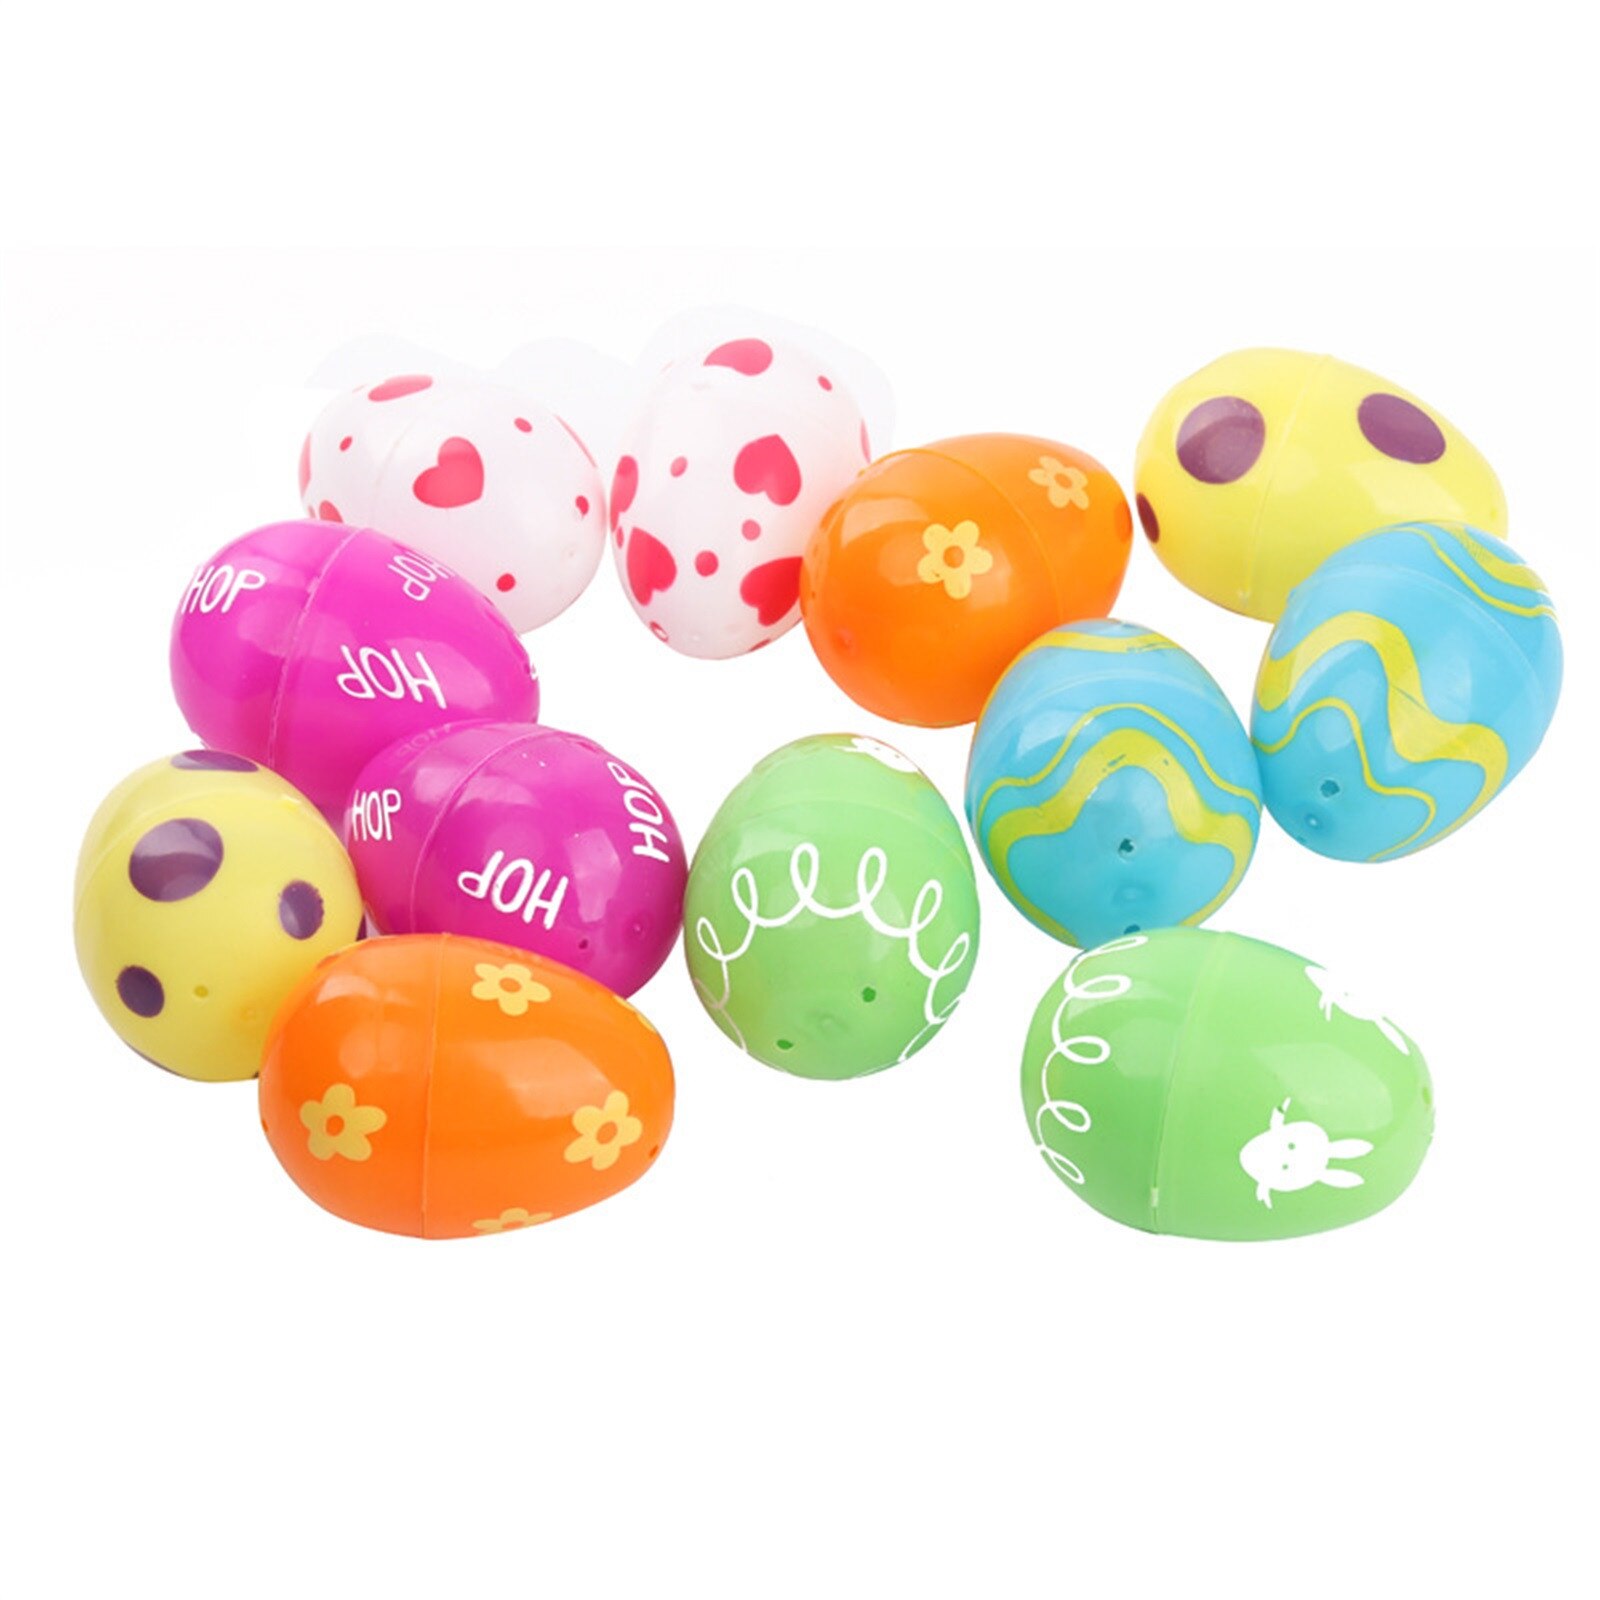 12pc Fillable Plastic Easter Eggs Hunt Party Supply Pack Assorted Pattern Prints Boy Girl Toy Children's Toys Birthday #03: Default Title